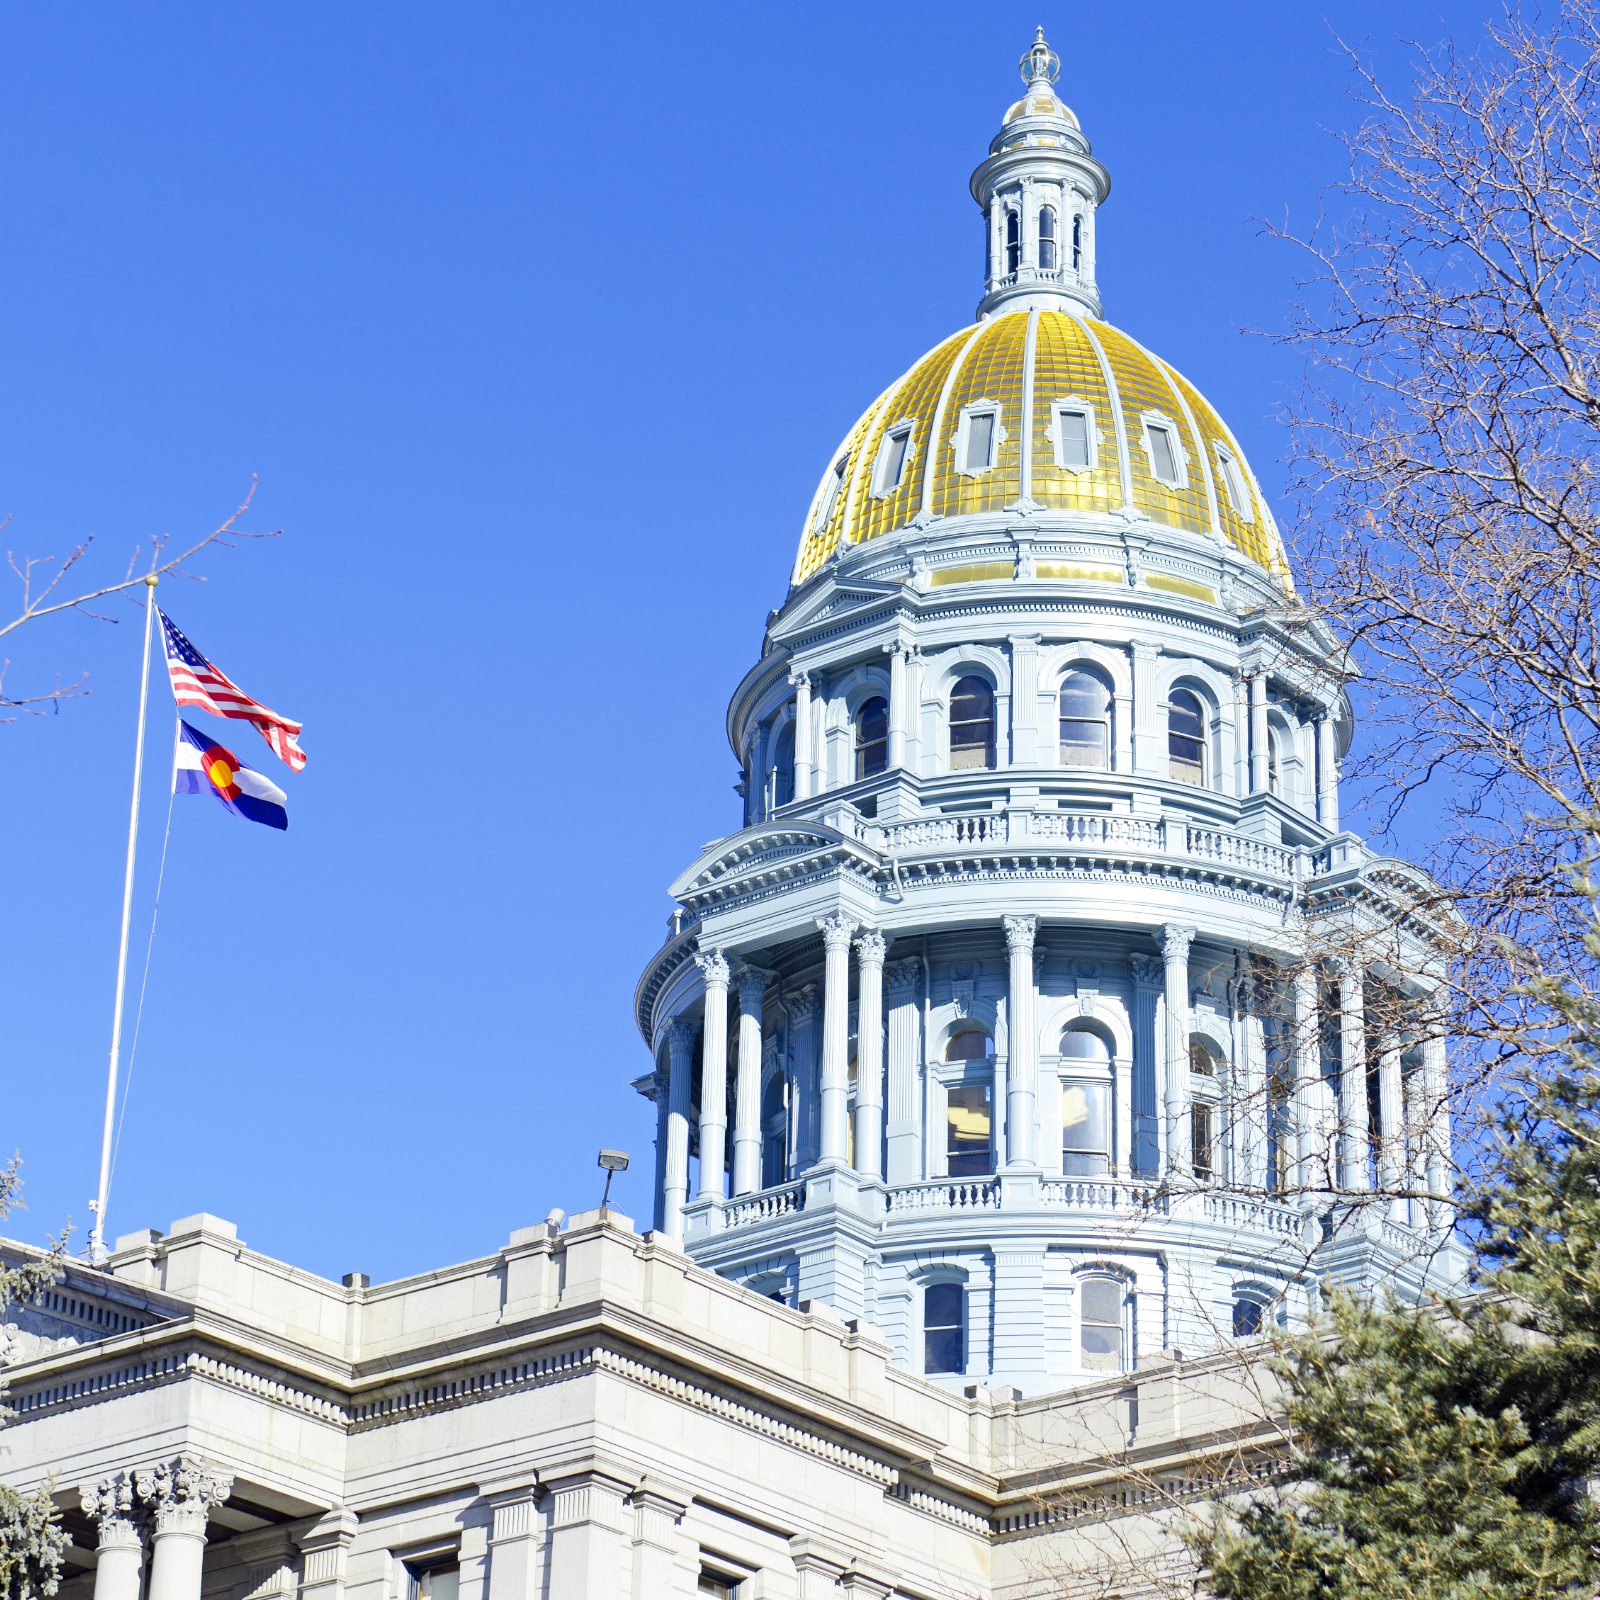 Colorado Takes Action Against Four More ICOs - 12 in Total